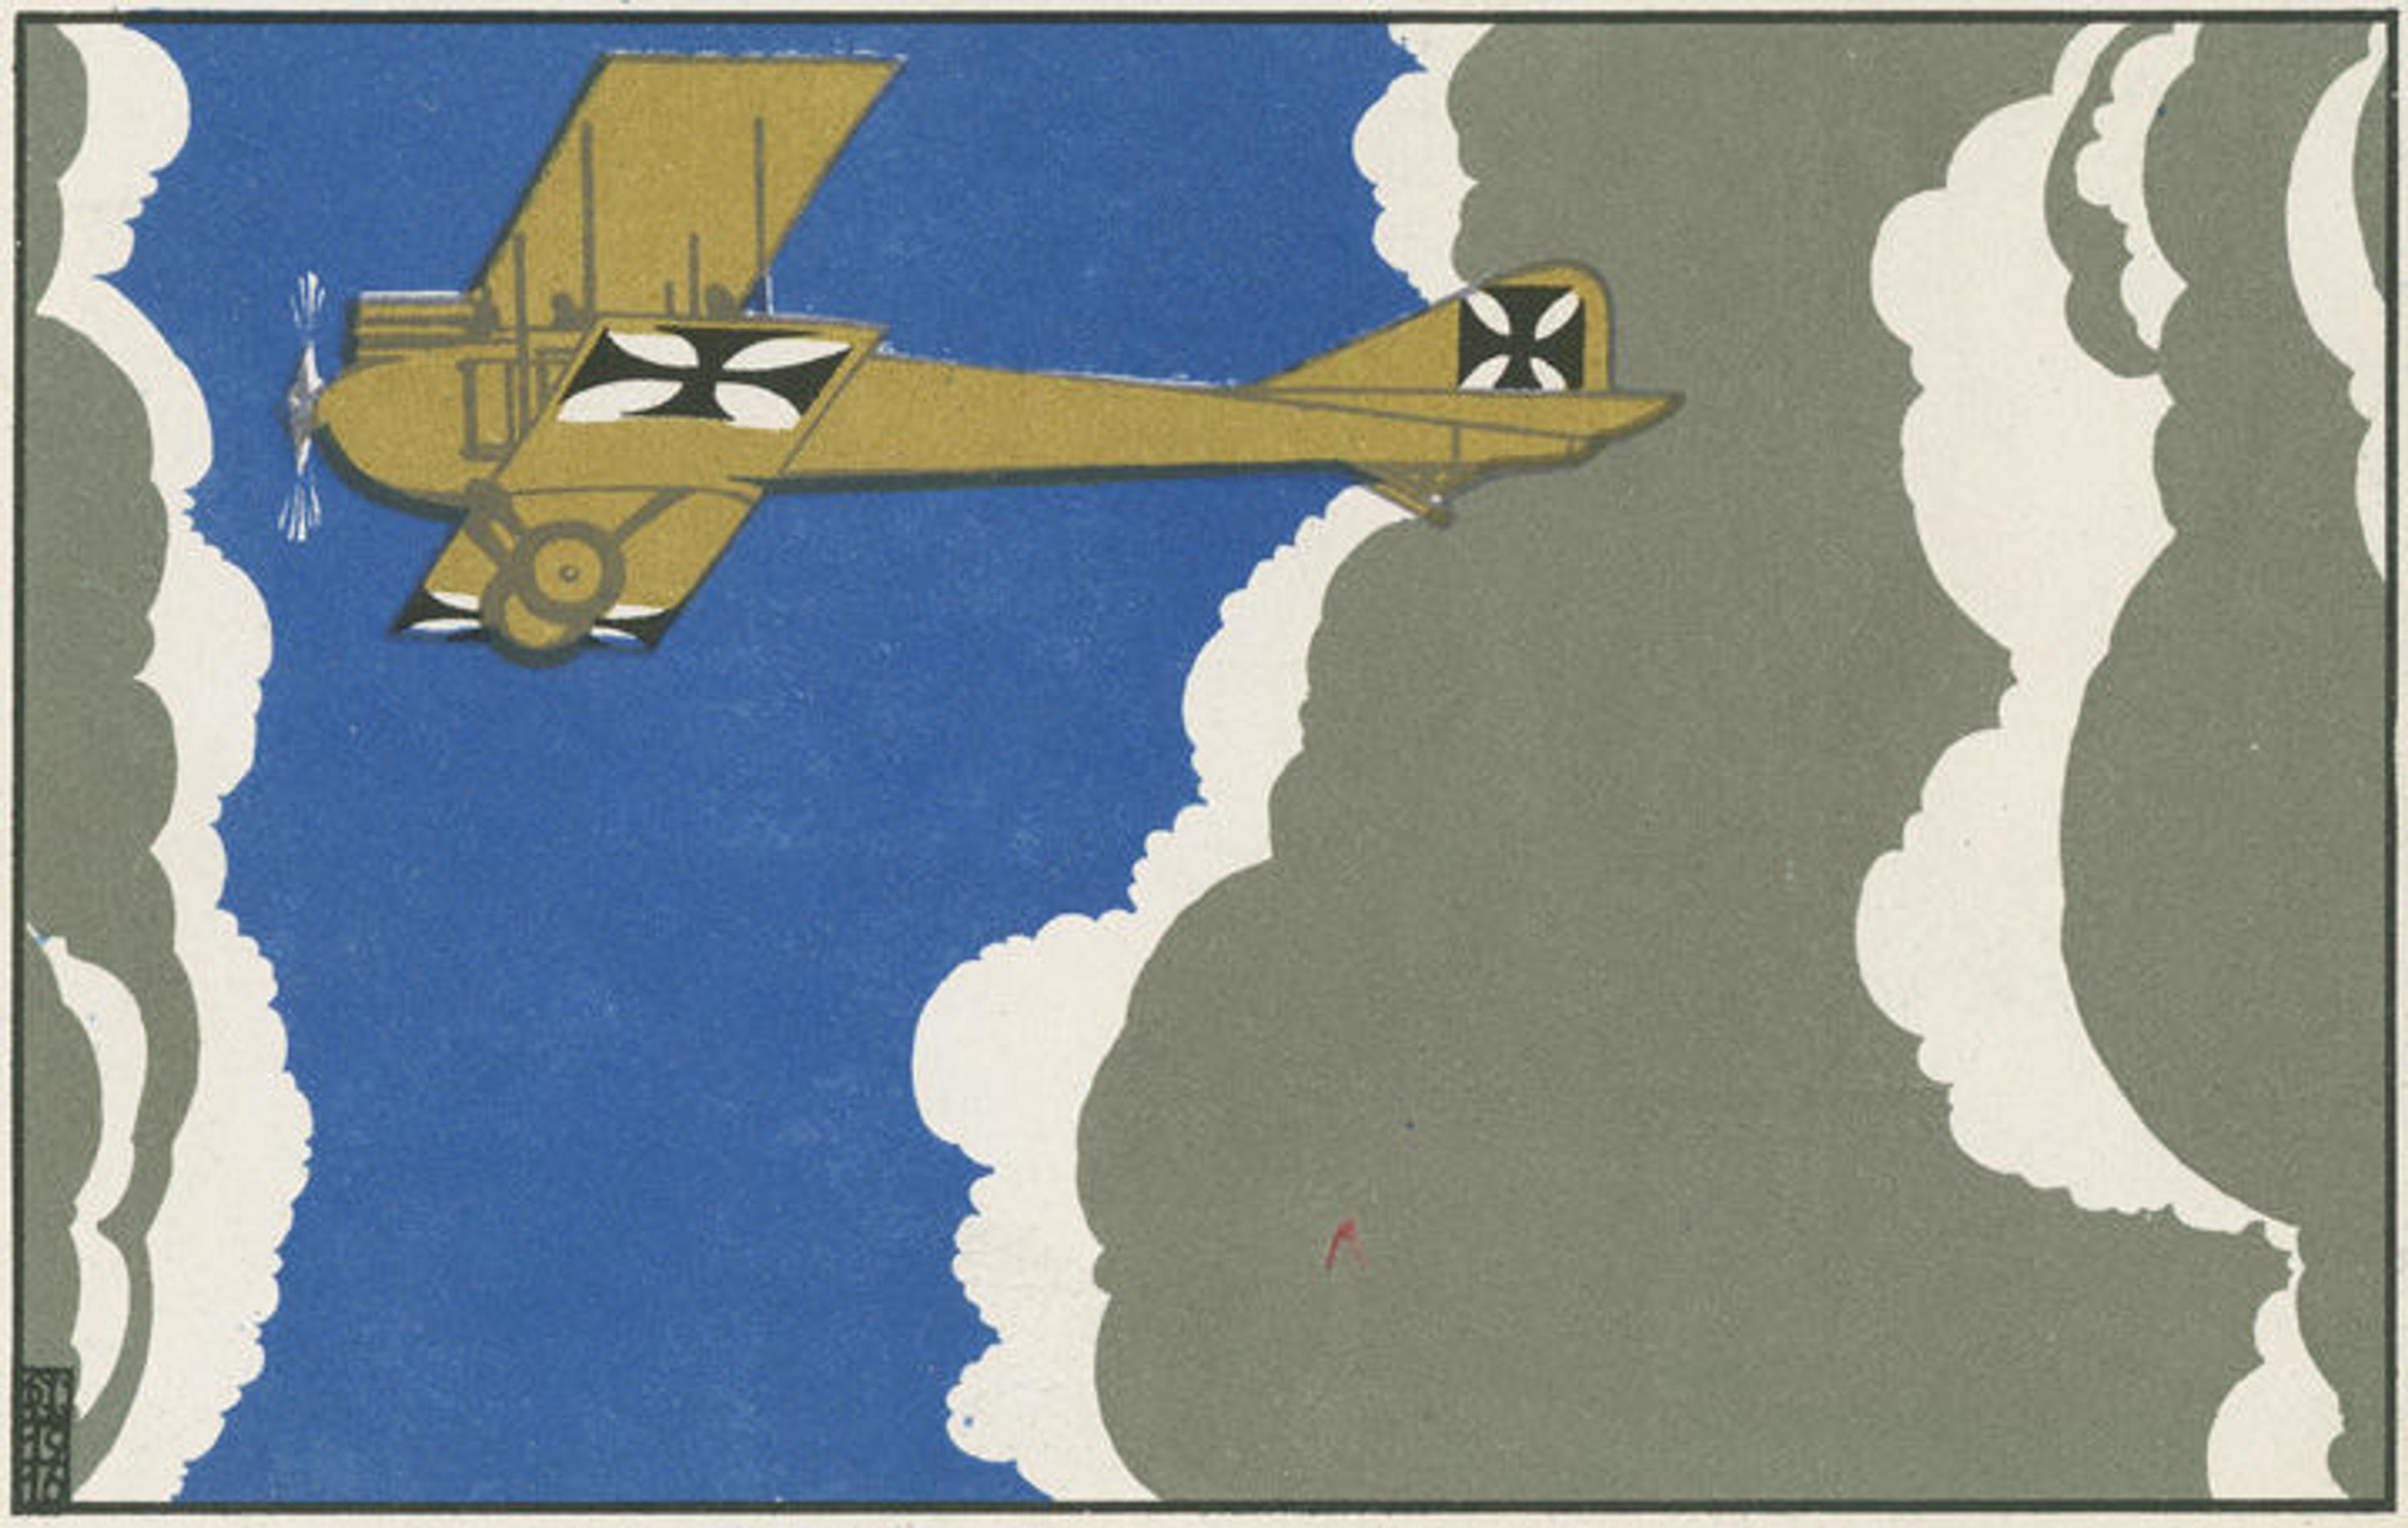 1915-16 postcard depicting a war plane against a dark-blue sky filled with gray clouds